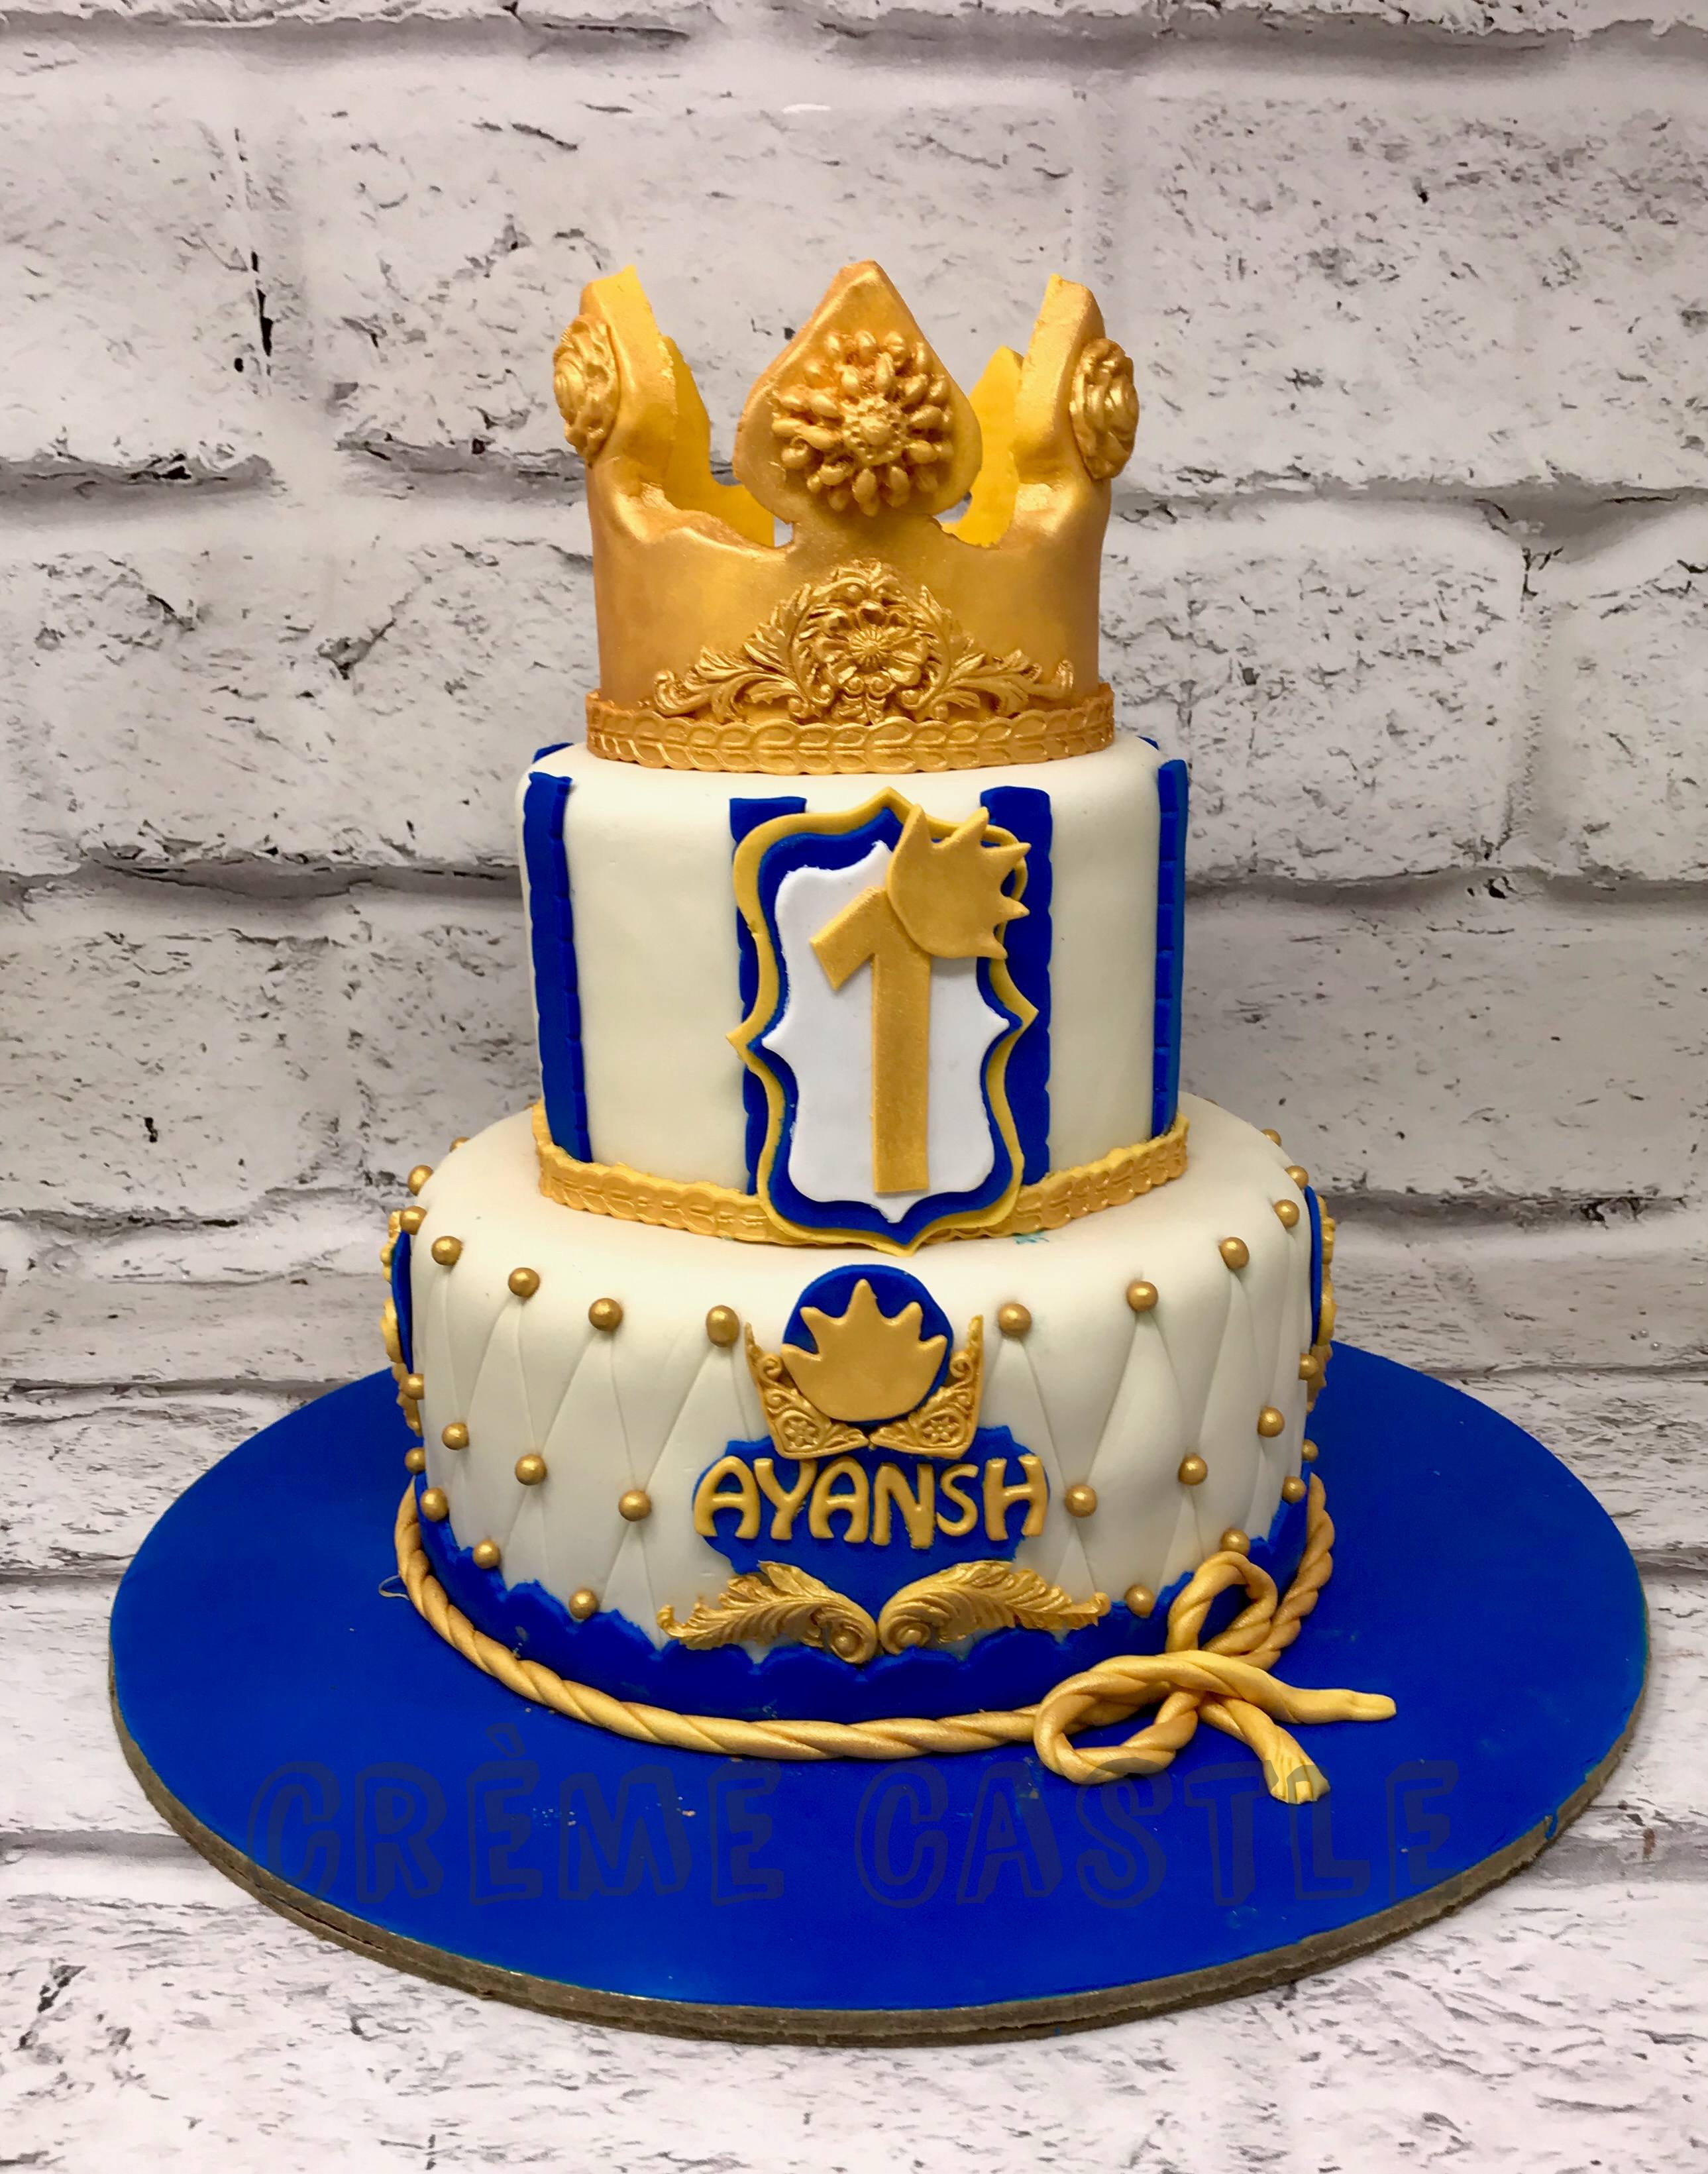 King Theme Birthday Cake - Happy Mothers Day Cake Designs